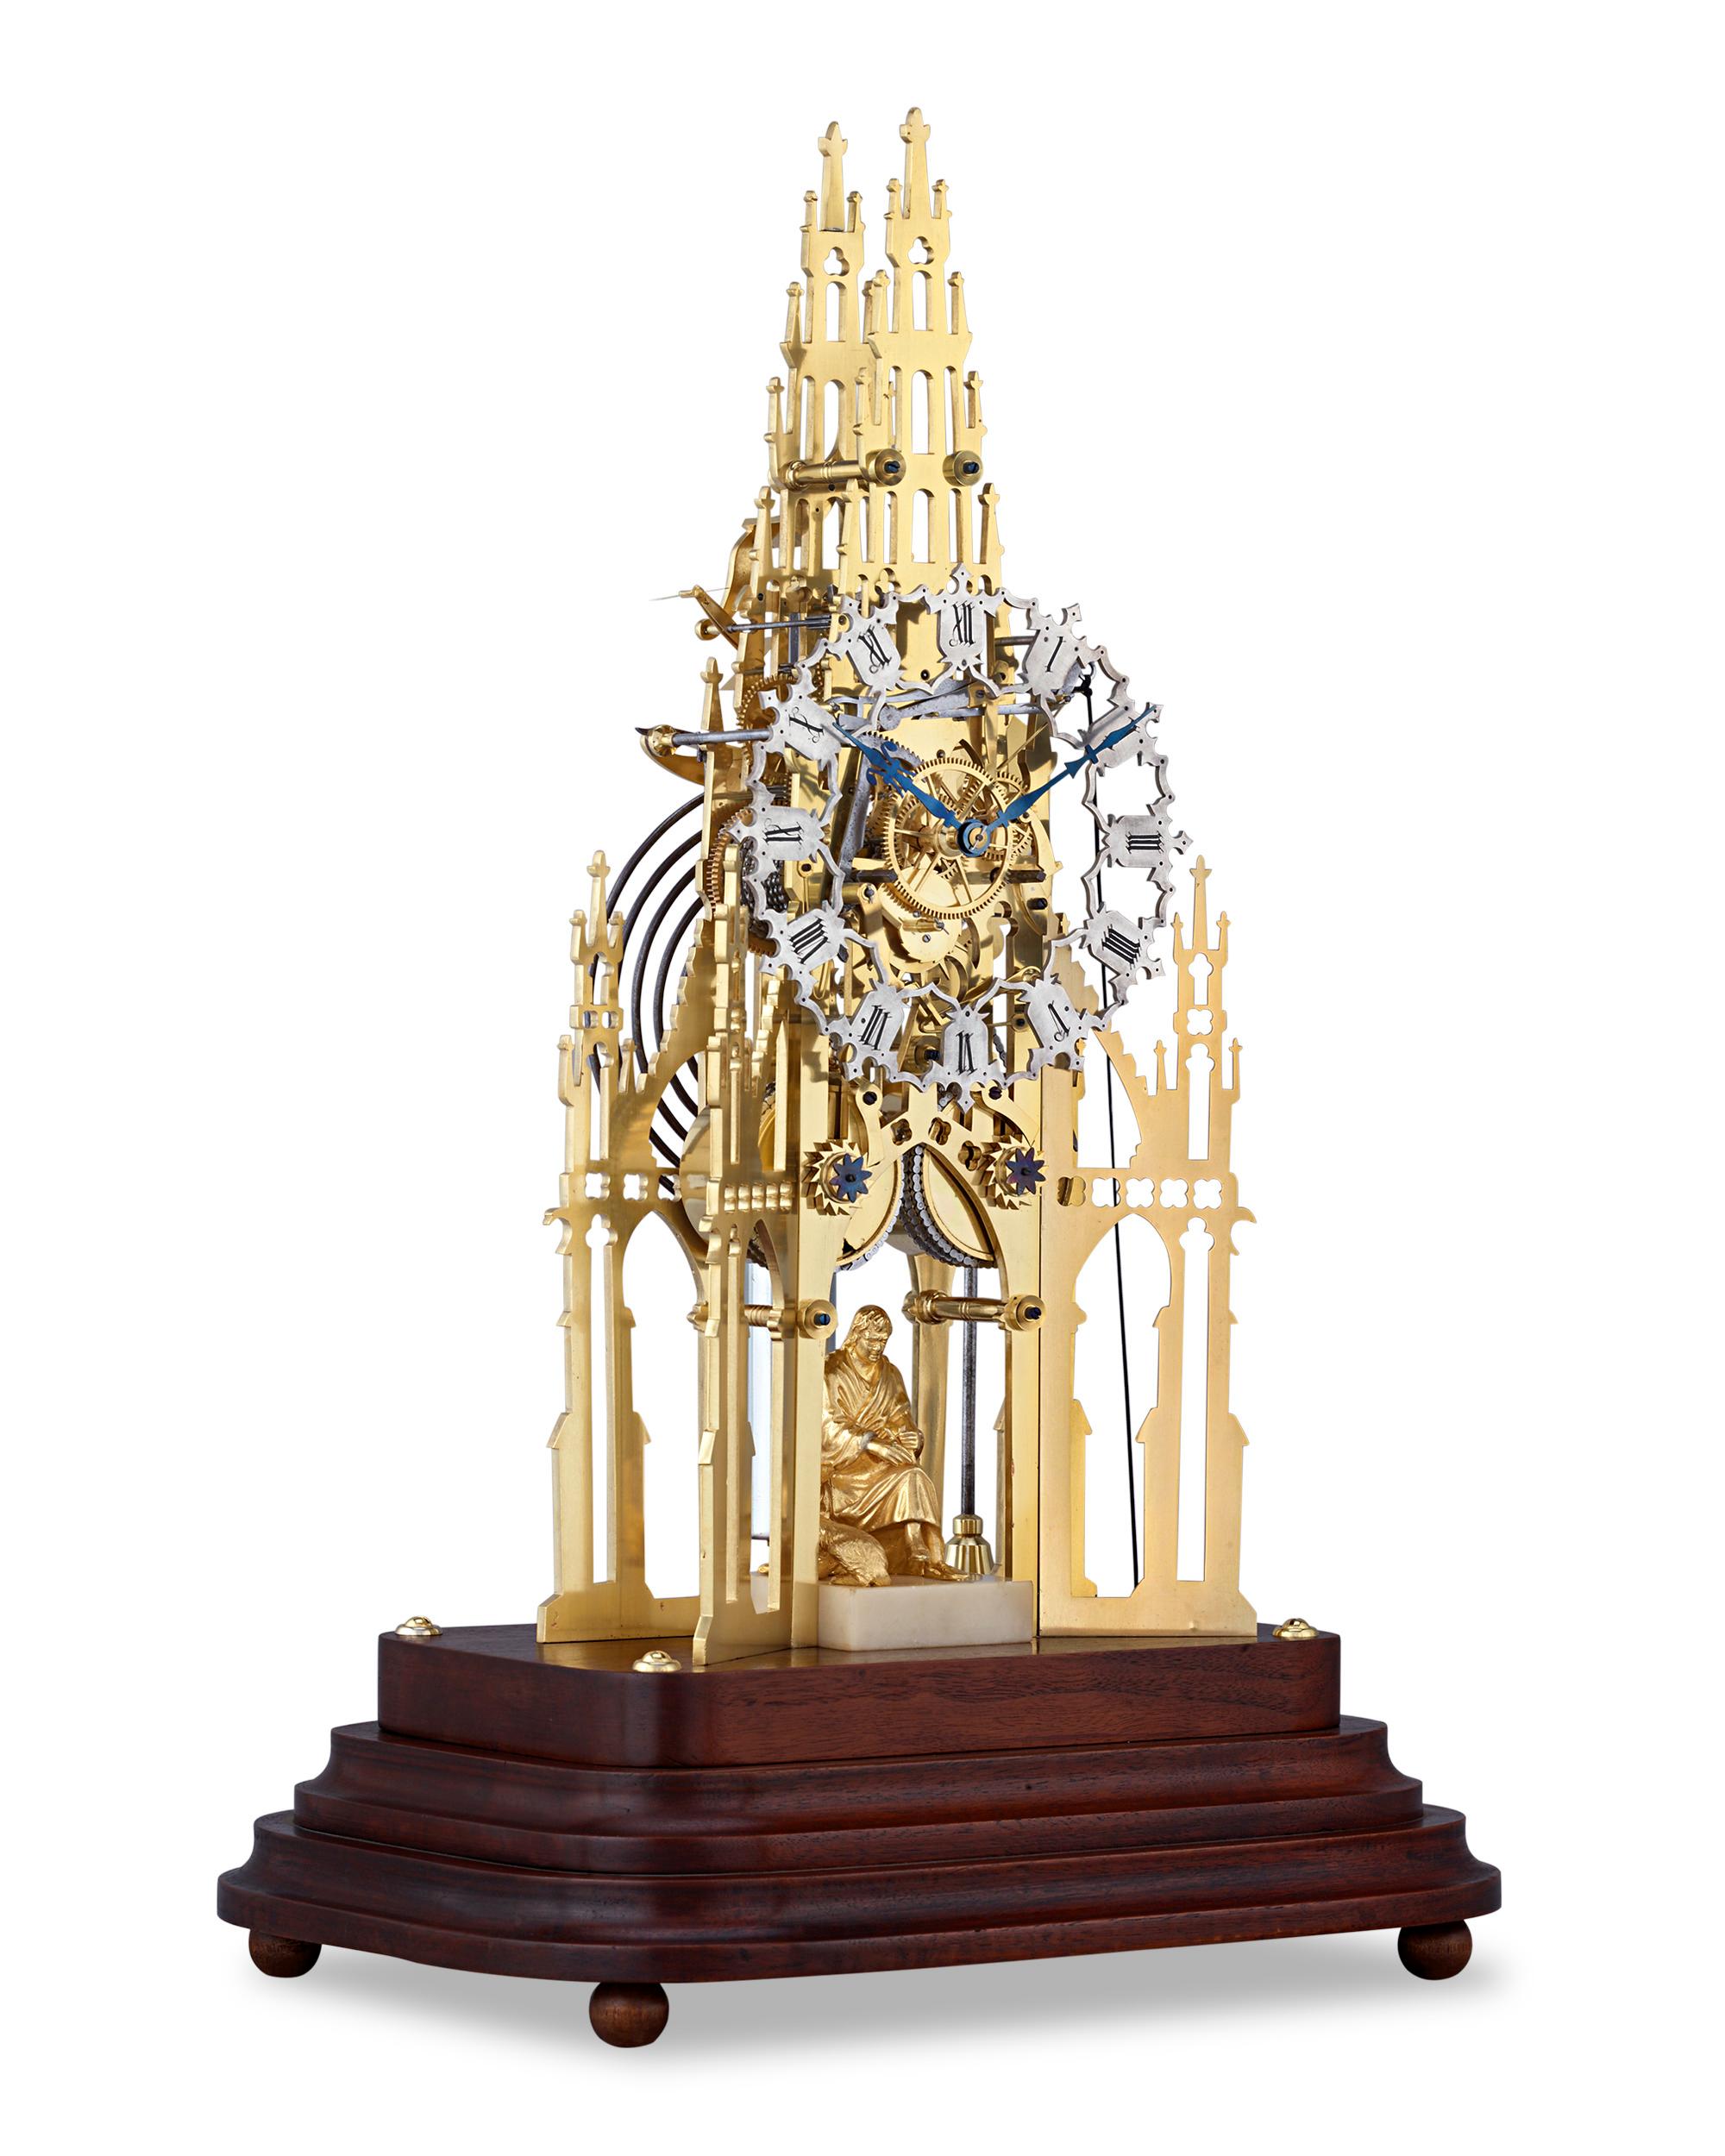 Skillfully designed in homage to the grand Sir Walter Scott Memorial in Edinburgh, Scotland, this Victorian brass skeleton clock is a wonderful specimen of English clockmaking. The clock keeps the time with a highly accurate eight-day two-train